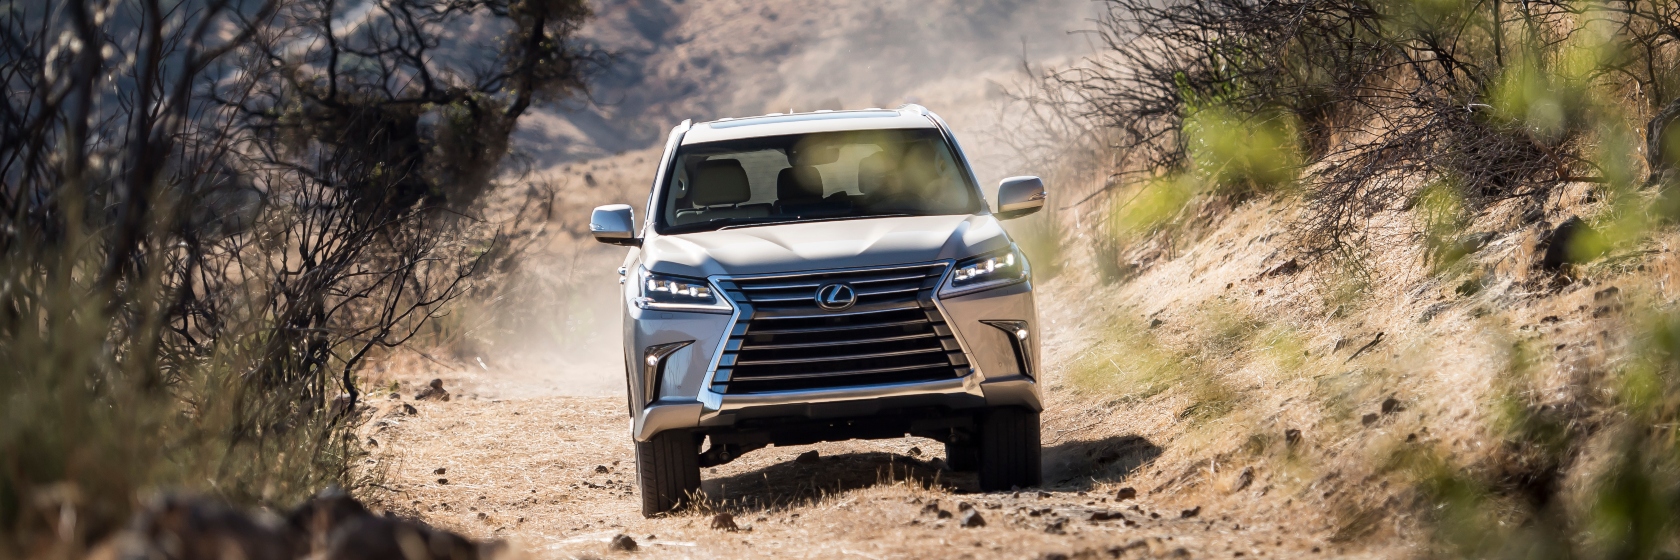 pre-owned-lexus-4x4-for-off-raod-adventures